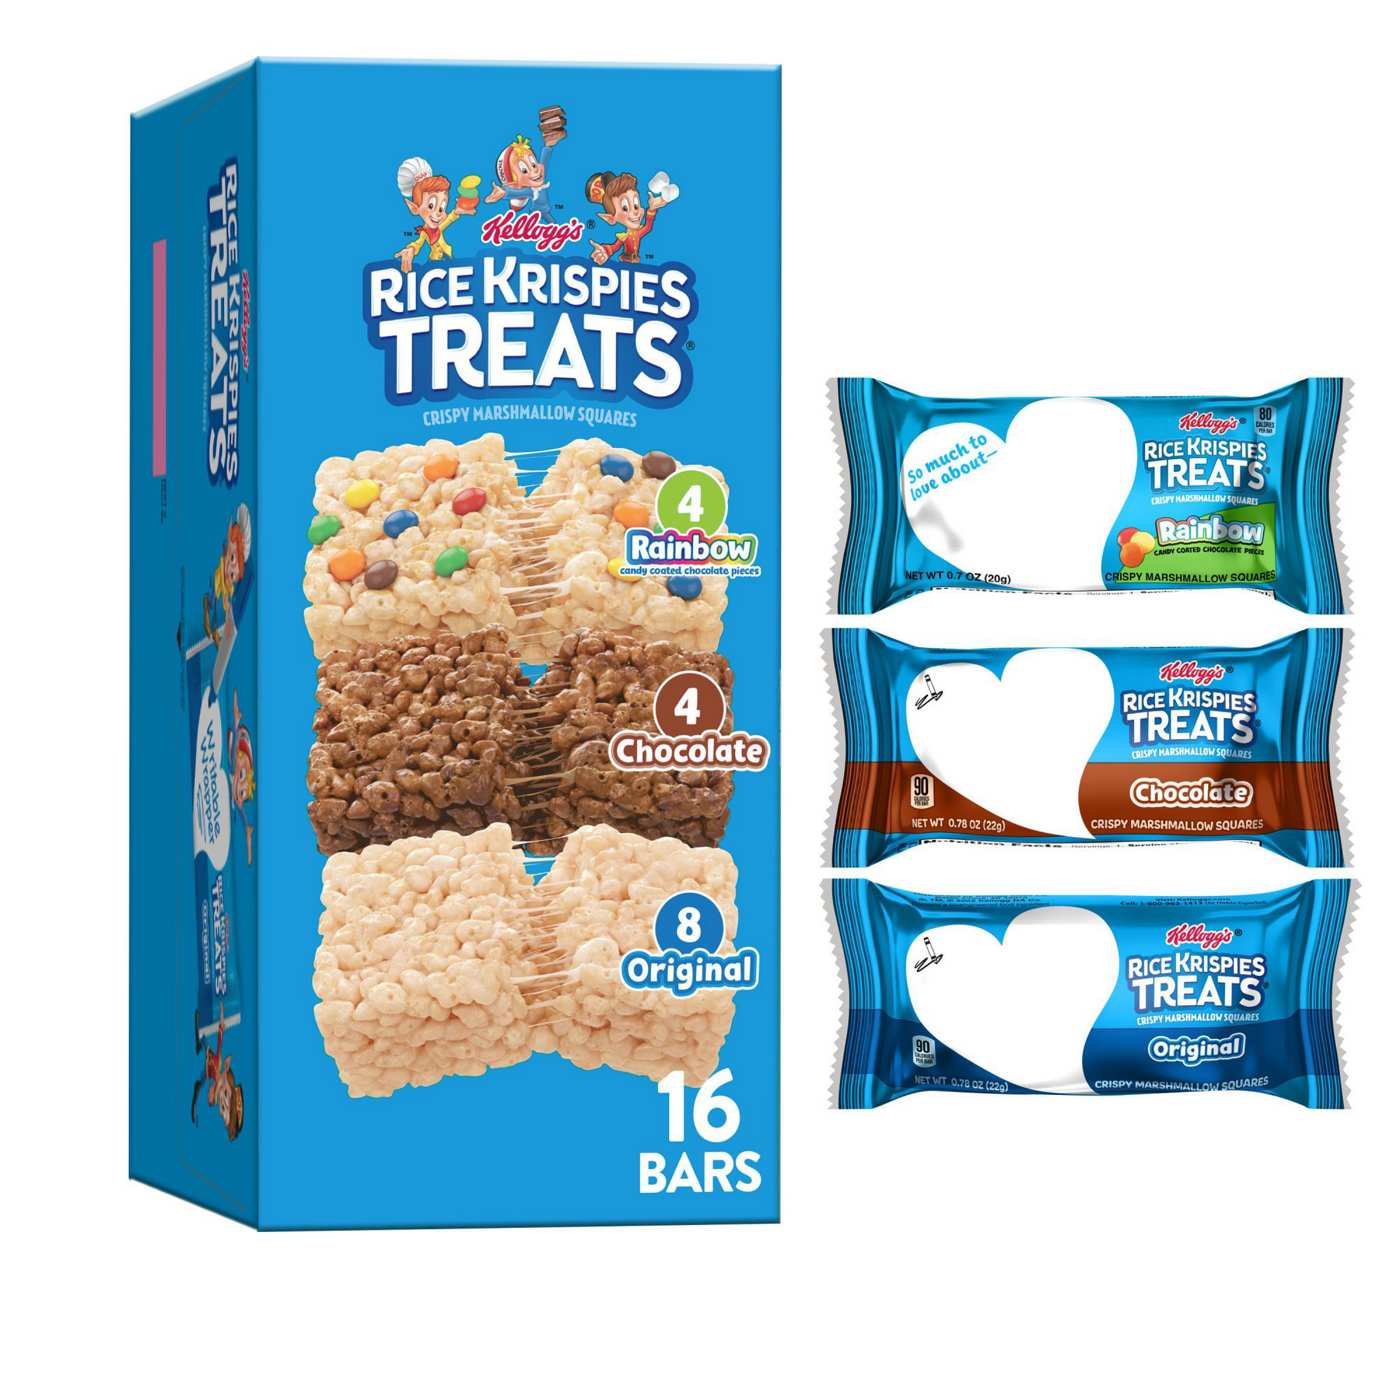 Rice Krispies Treats Variety Pack Crispy Marshmallow Squares; image 8 of 8